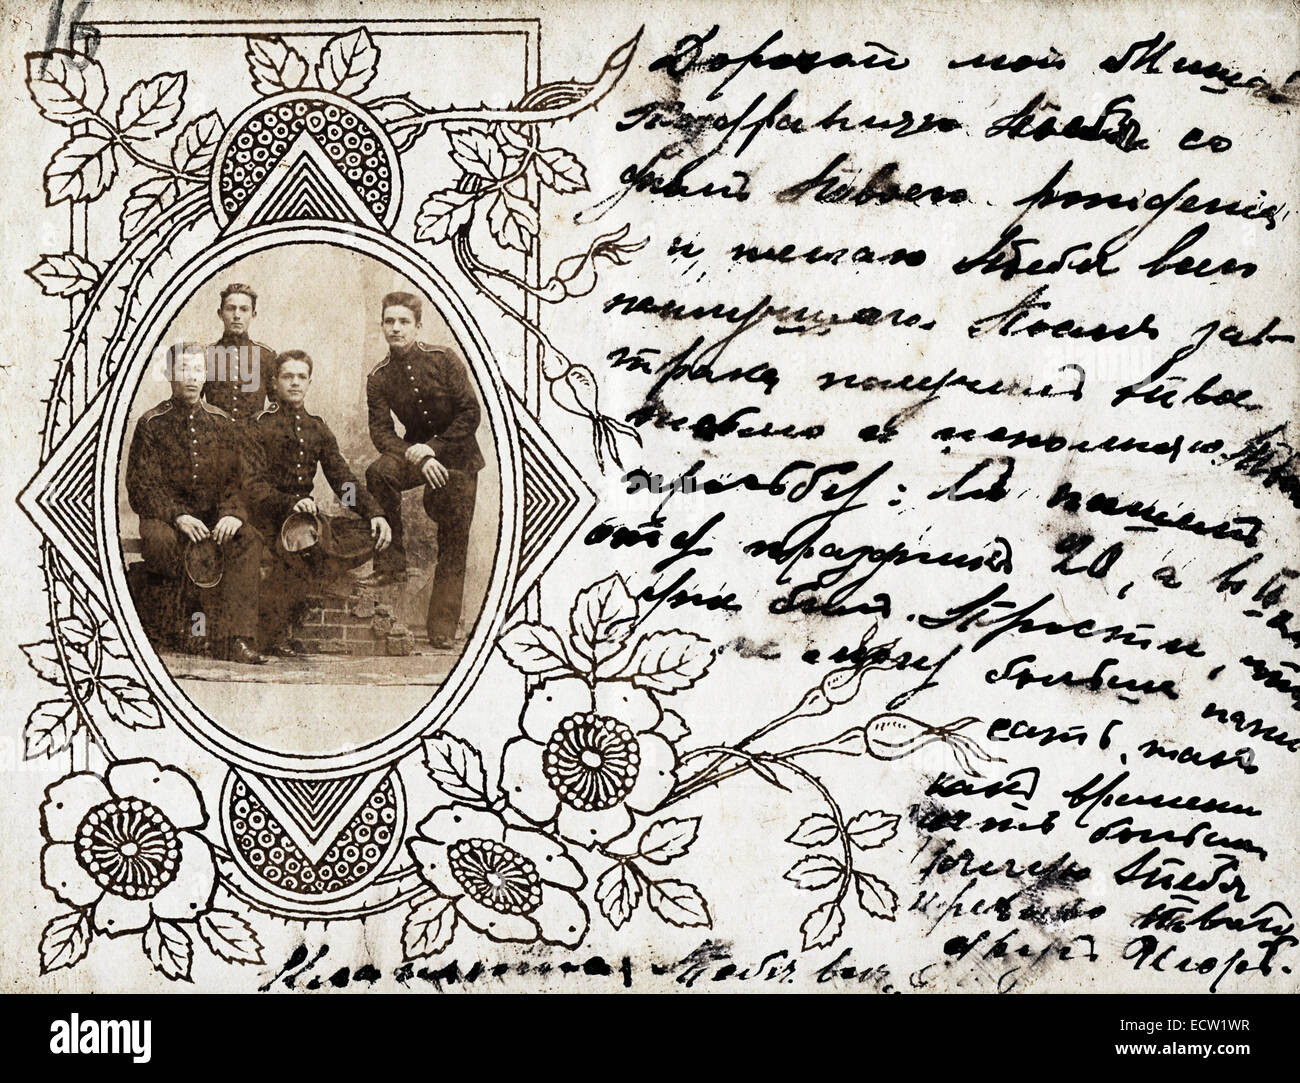 Handwritten letter with a group portrait of friends - Cadets, Russia, circa 1903-1905 Stock Photo